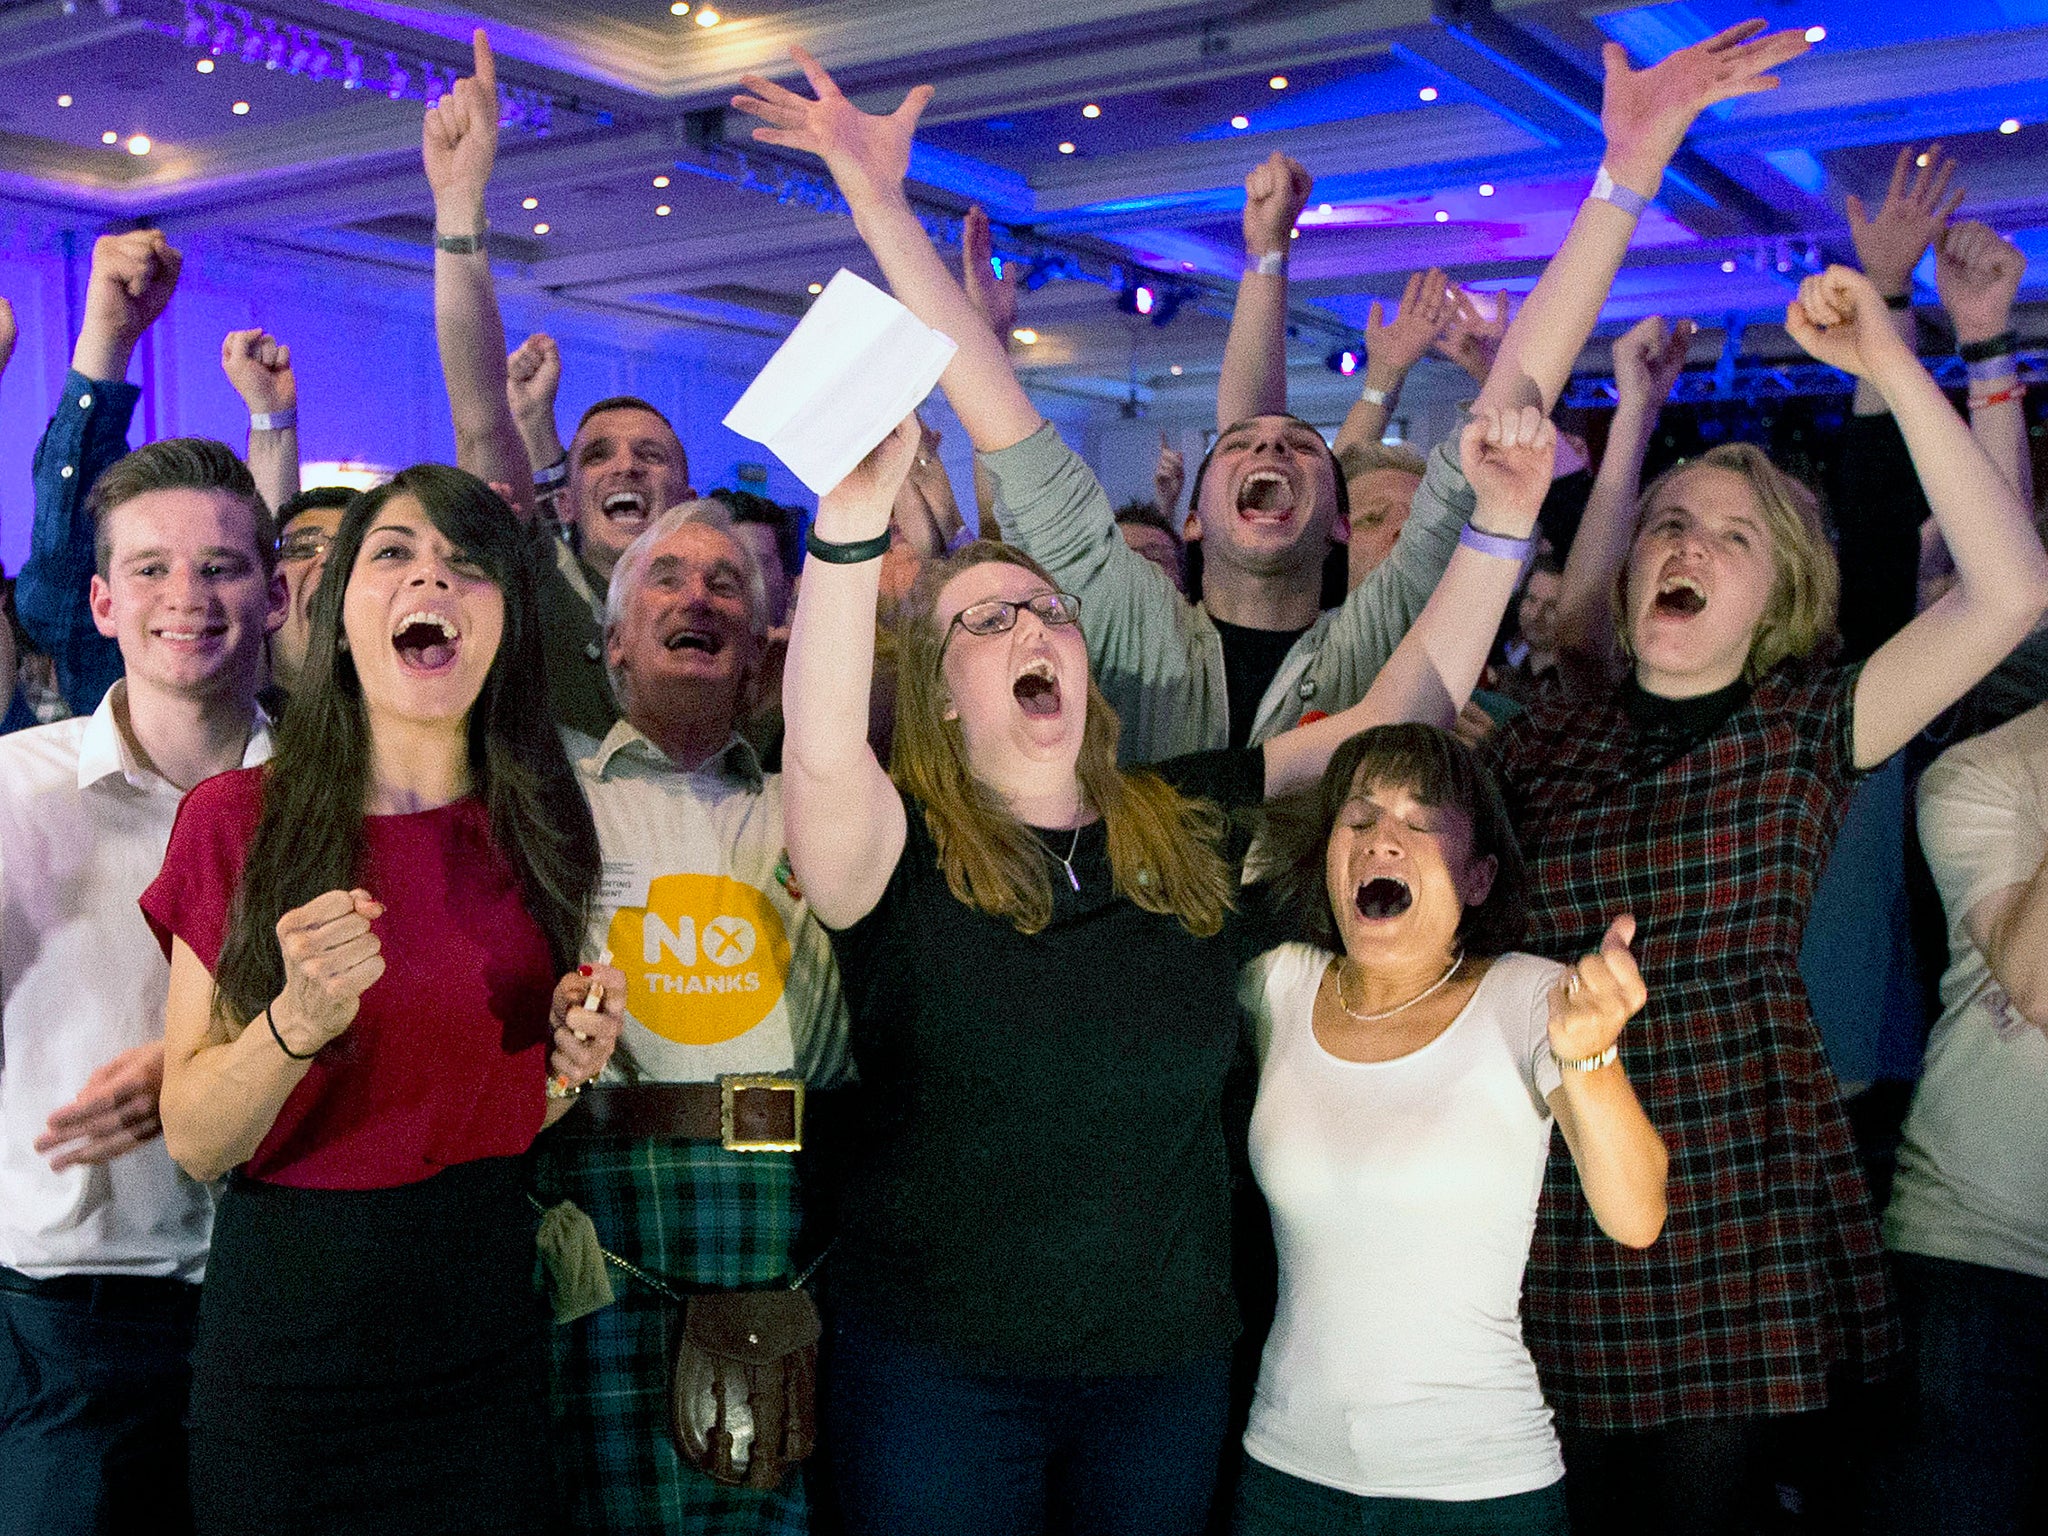 No supporters for the Scottish independence referendum celebrate a result at a No campaign event at a hotel in Glasgow